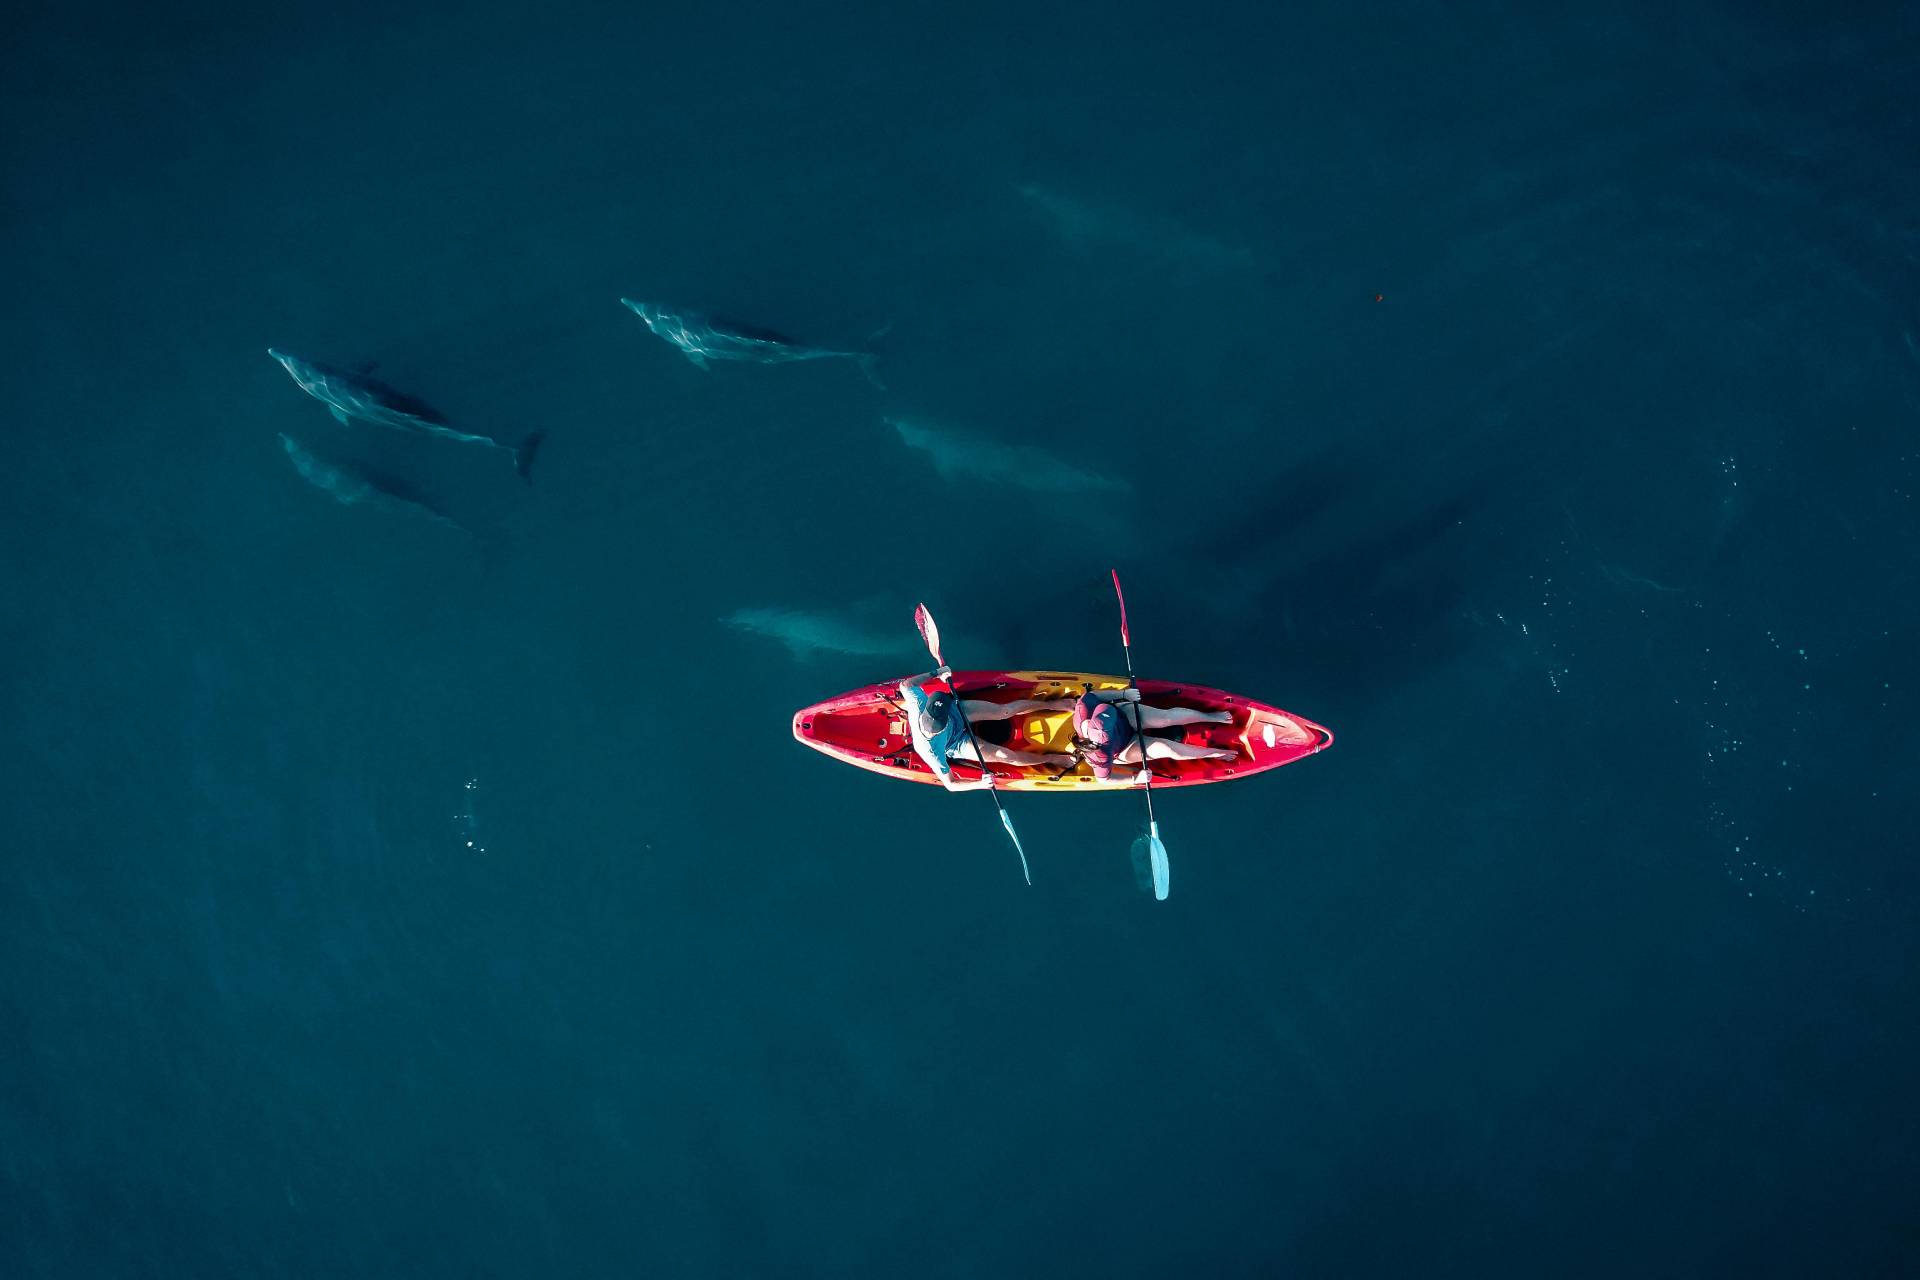 Kayaking with Dolphins